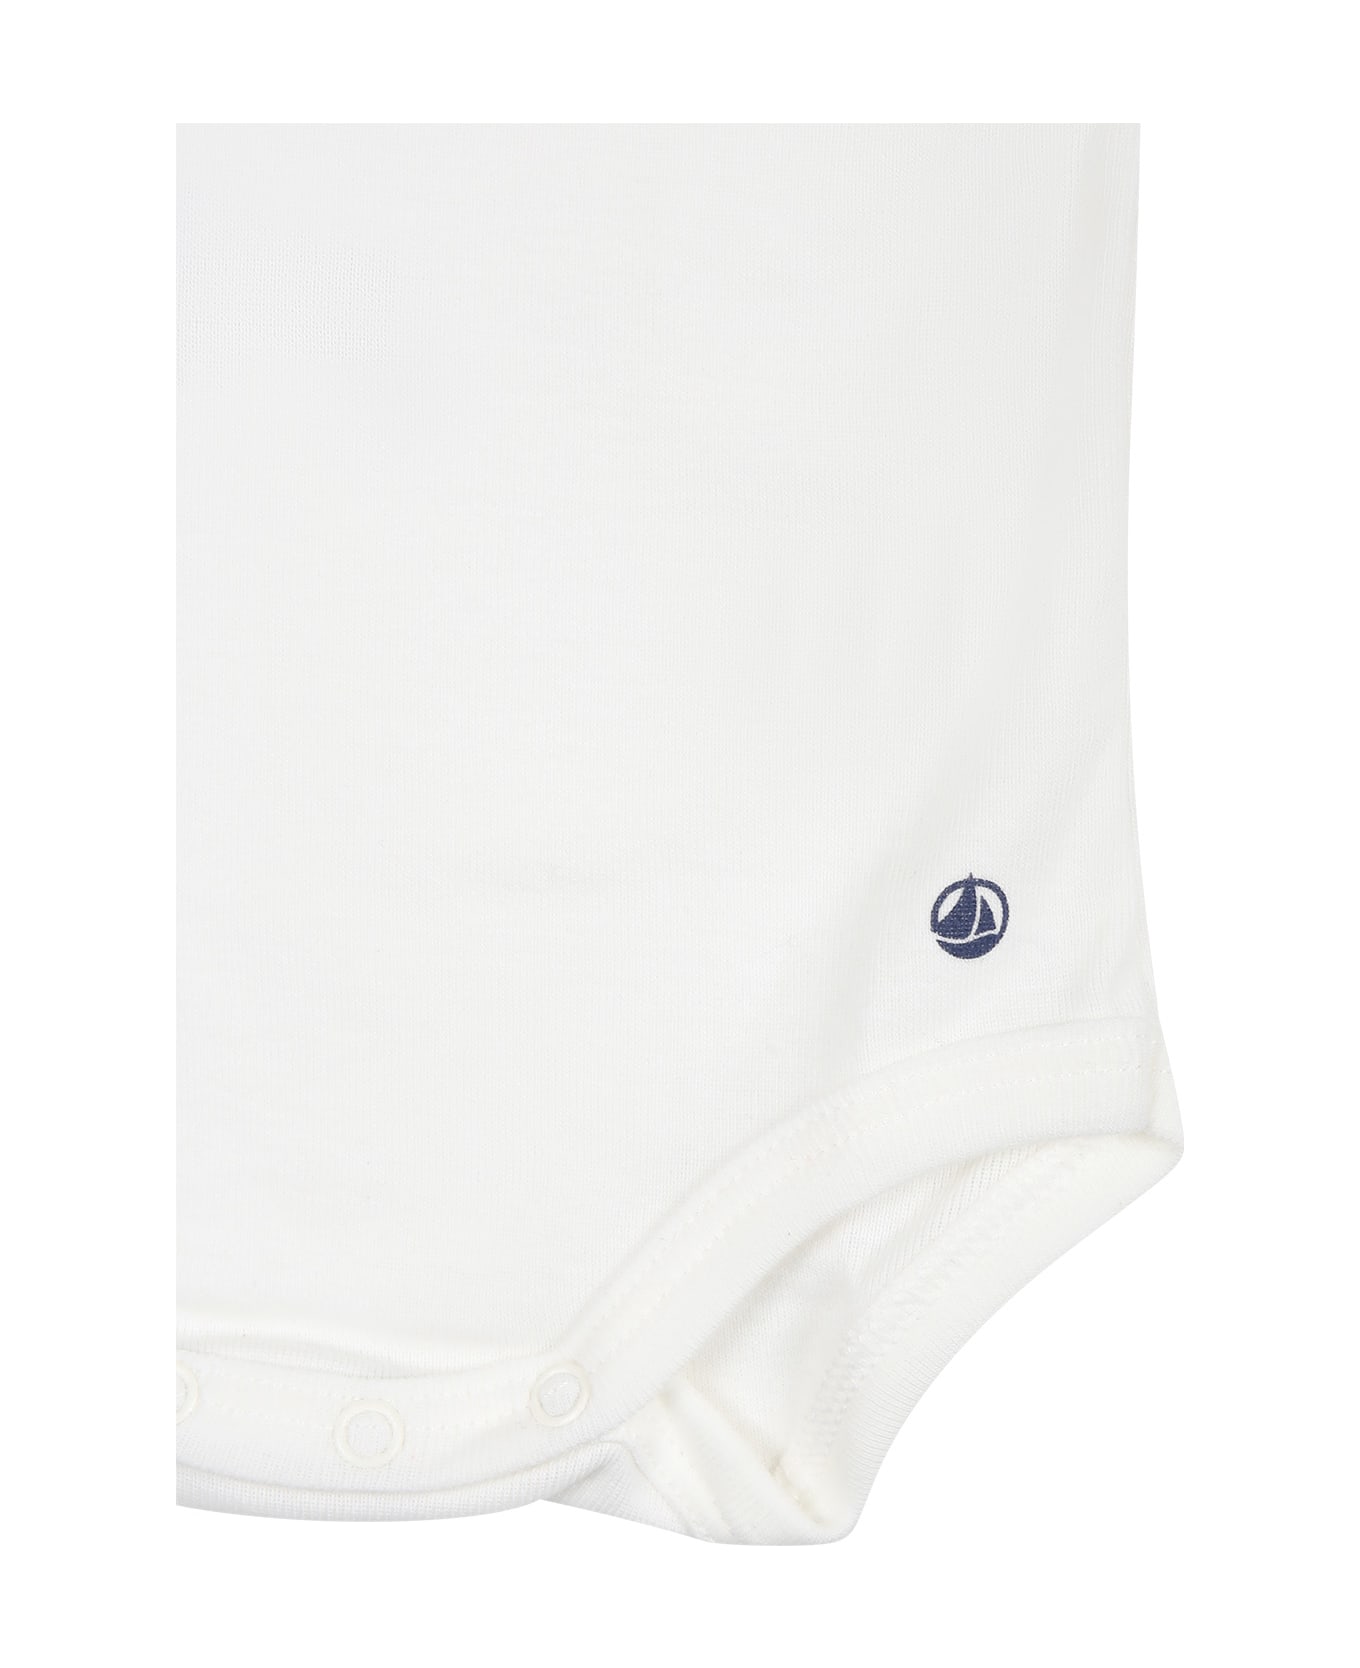 Petit Bateau White Bodysuit For Baby Girl With Ruffles - White ボディスーツ＆セットアップ